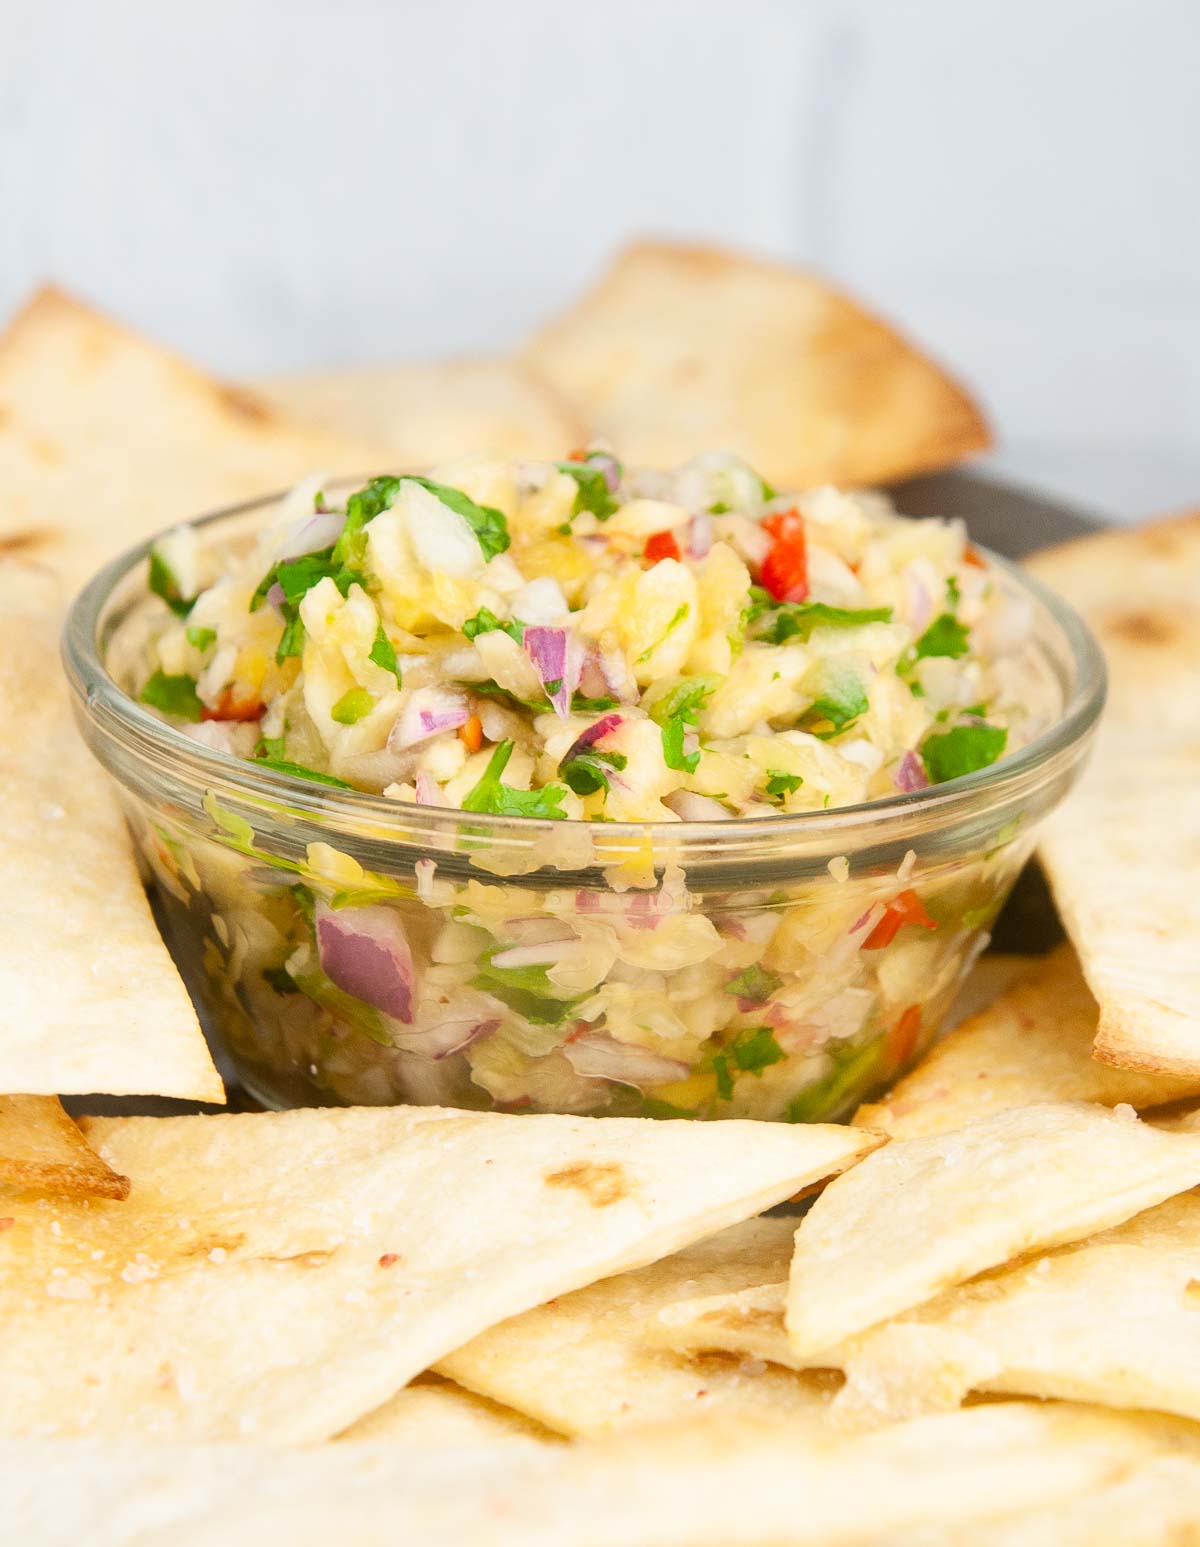 Pineapple mango salsa makes a yummy dip for chips or topping for tacos, grilled chicken, and fish.